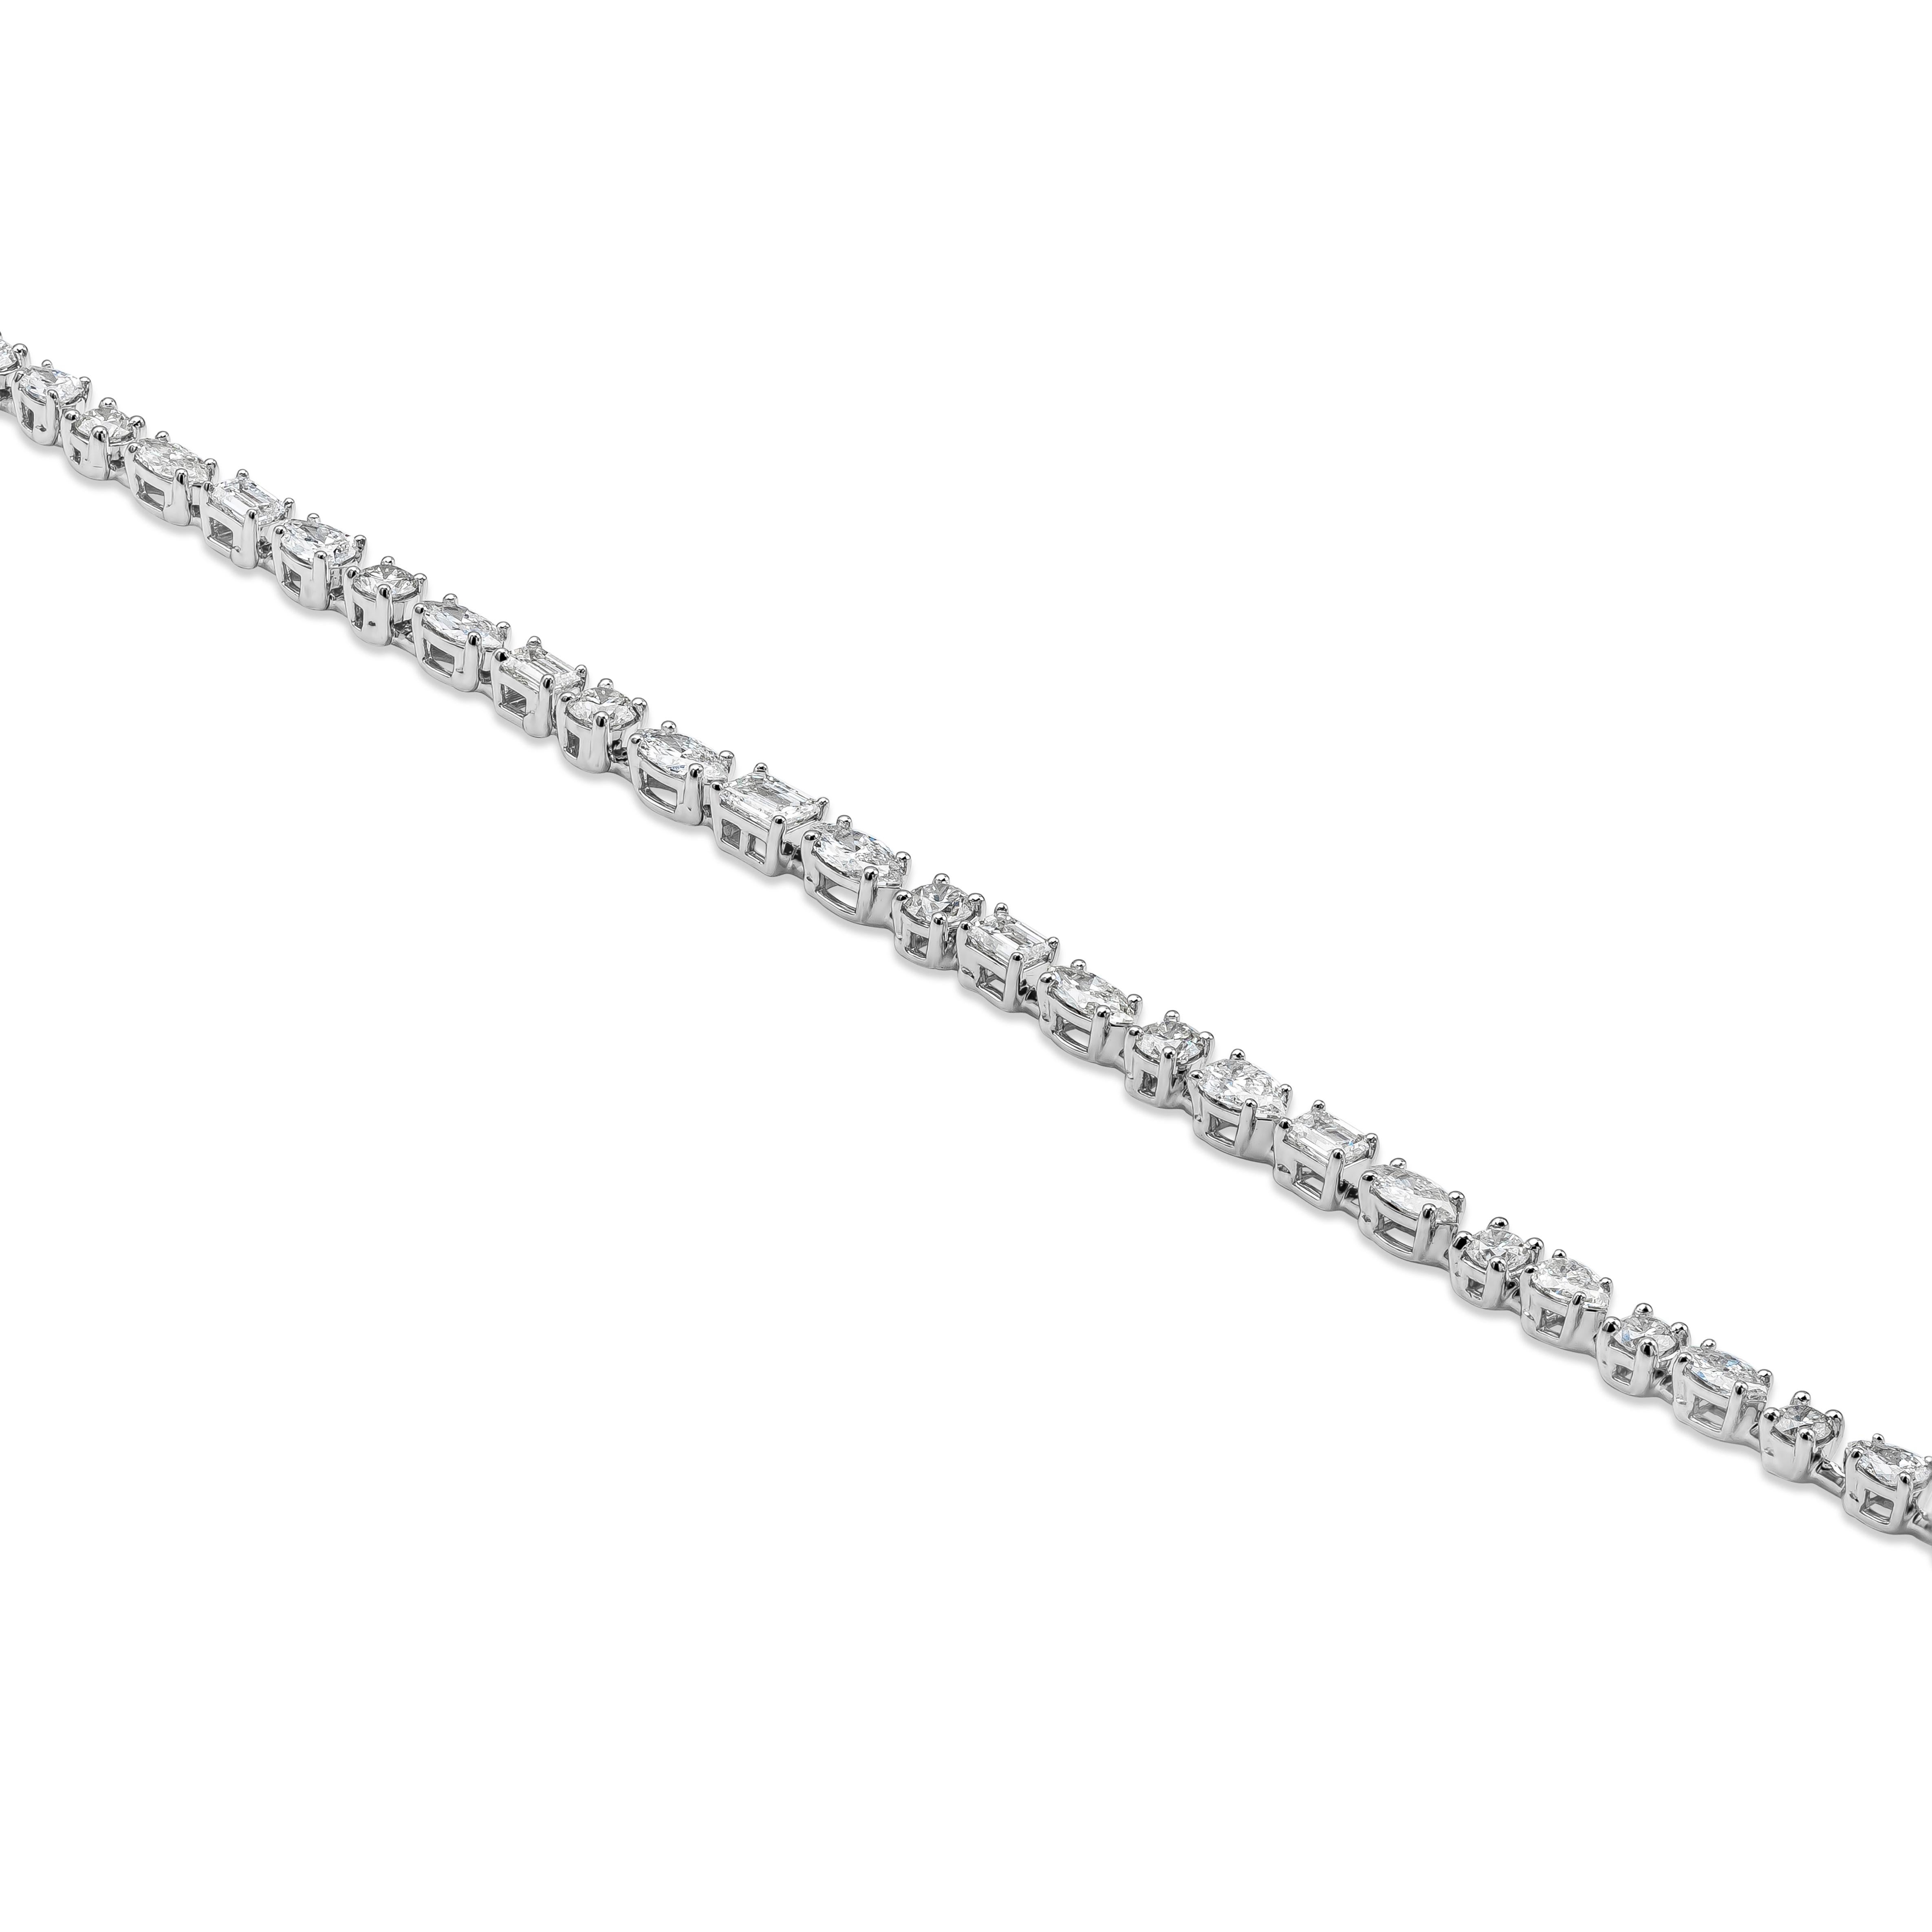 Showcasing a row of different shape diamonds, set in a tennis bracelet style. Diamonds weigh approximately 5.11 carats total. Made in 18k white gold. Seven inches in length. 

Customizable, length, size, and carat weight. Please contact us for more